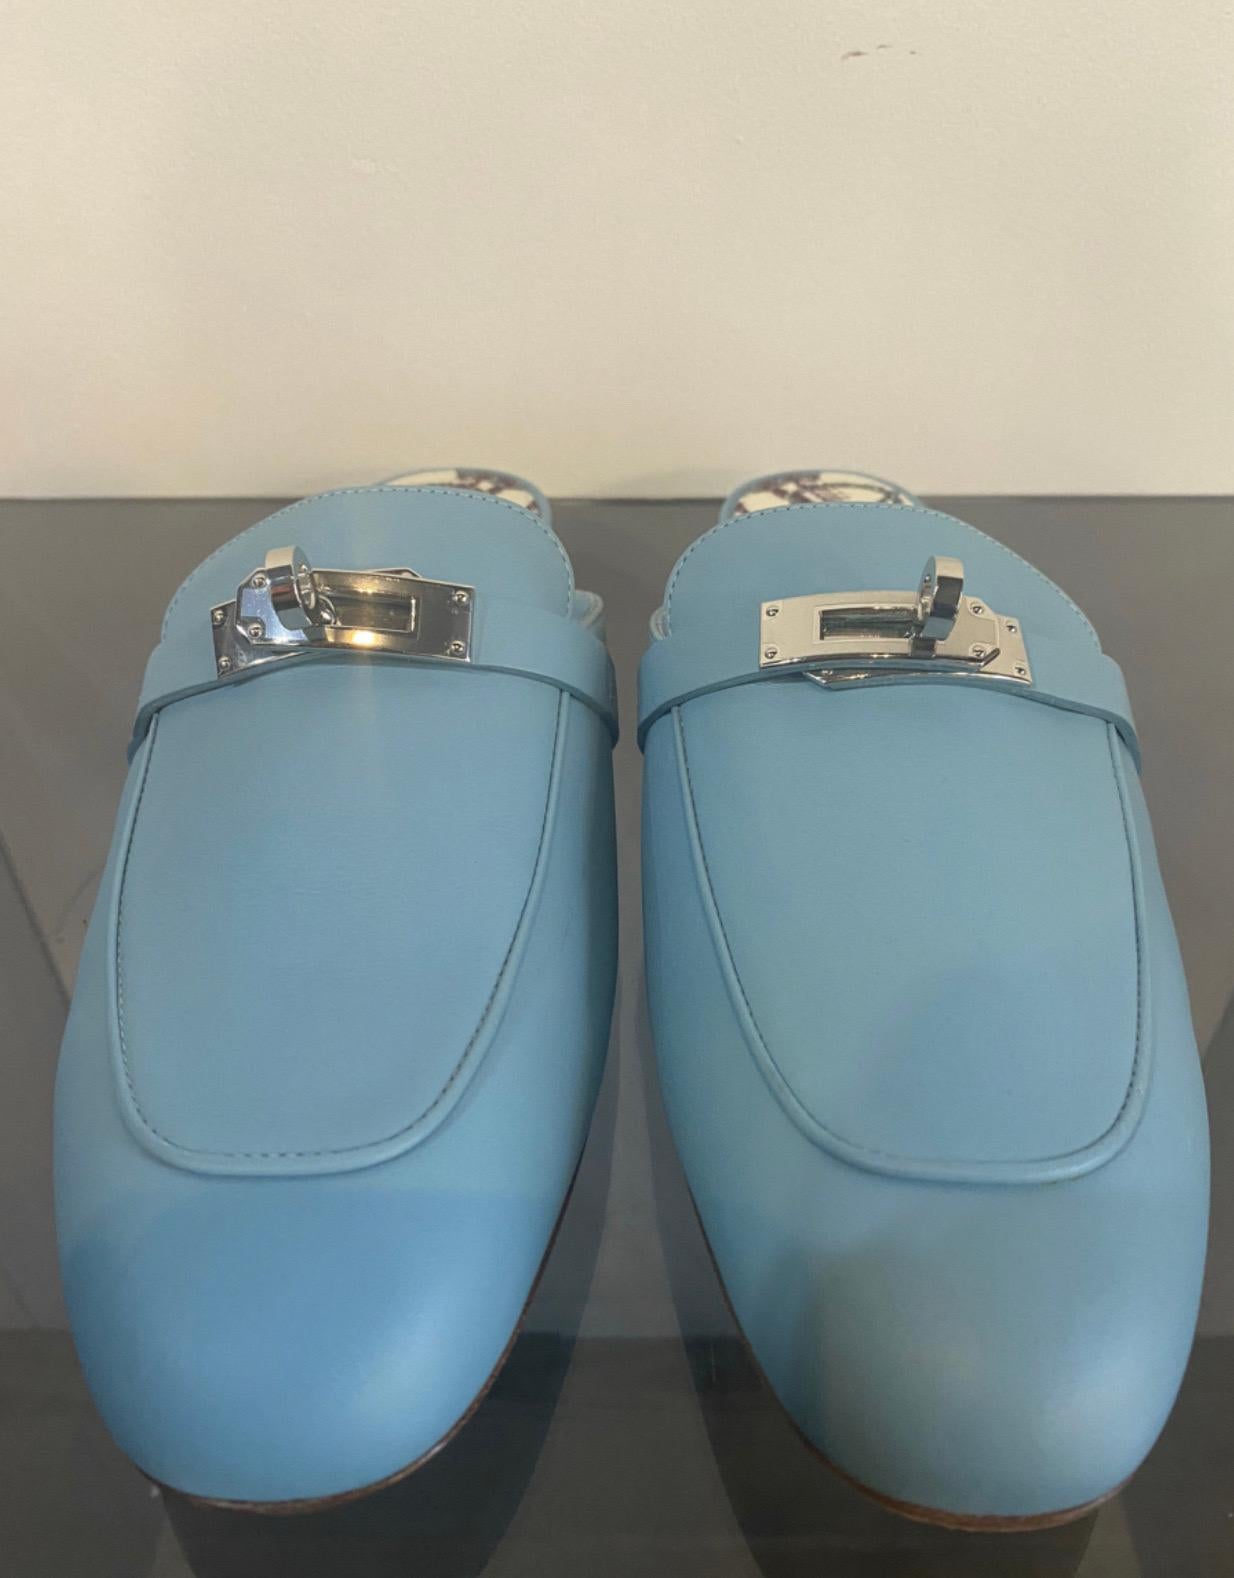 Hermes Oz slipper, 
size 39.5, in light blue leather, with steel-coloured closure, internally lined in Hermes print cotton.
heel height 2 cm, internal insole length 26 cm, in perfect condition, new never used.